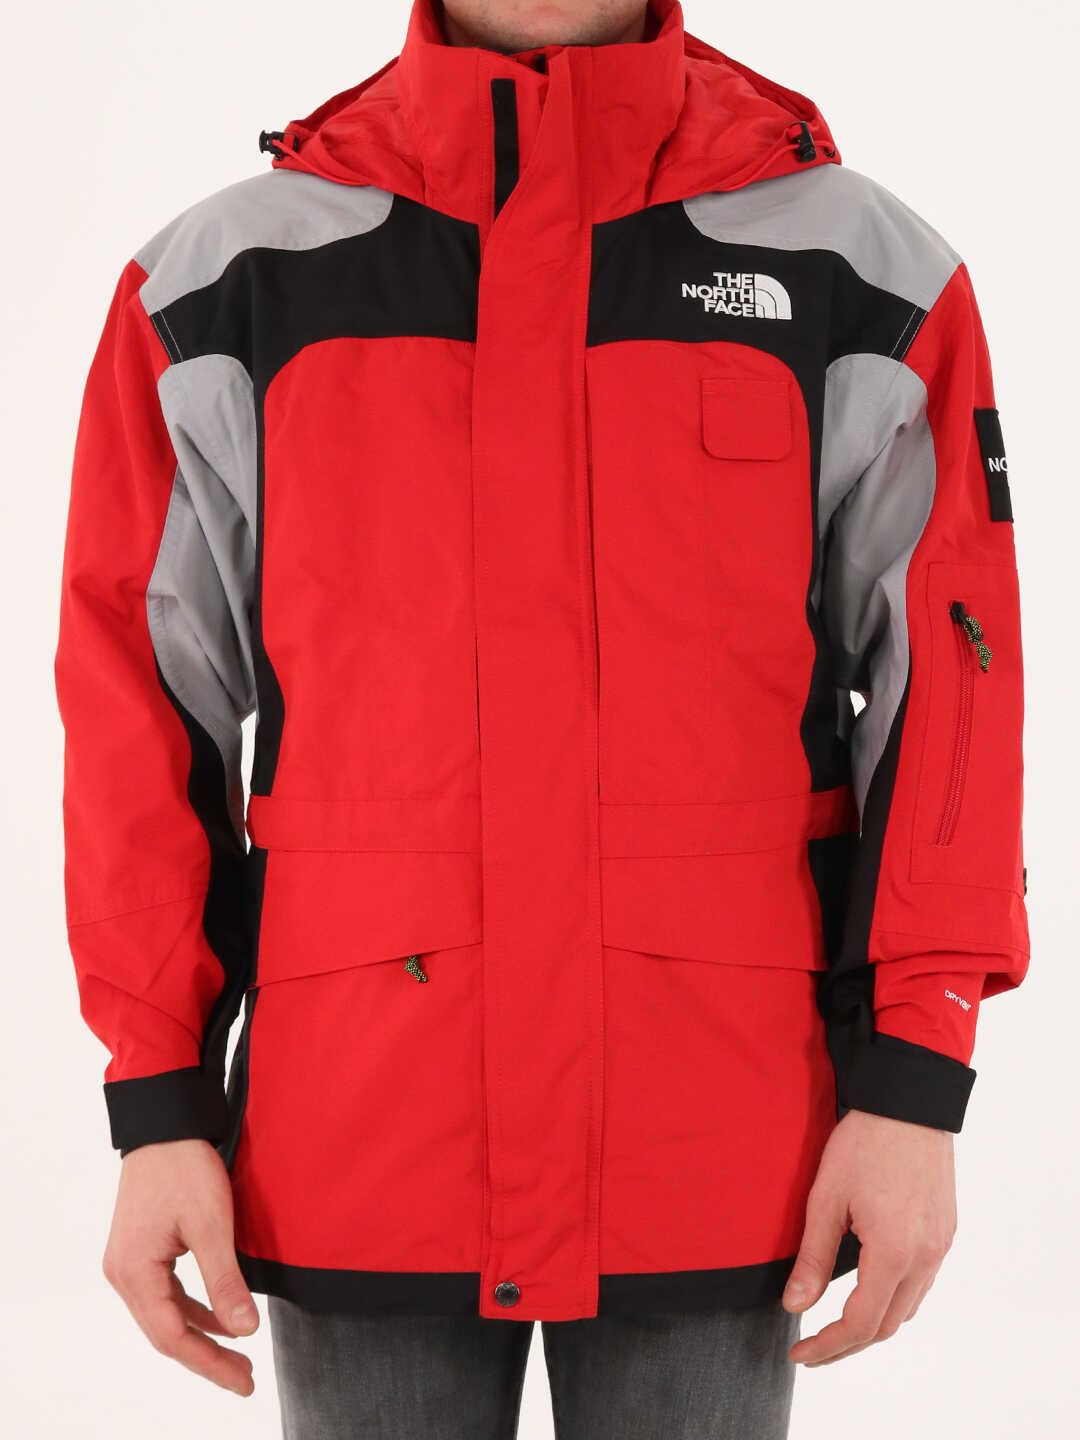 The North Face Search & Rescue Dryvent Jacket NF0A55I9 Red image0